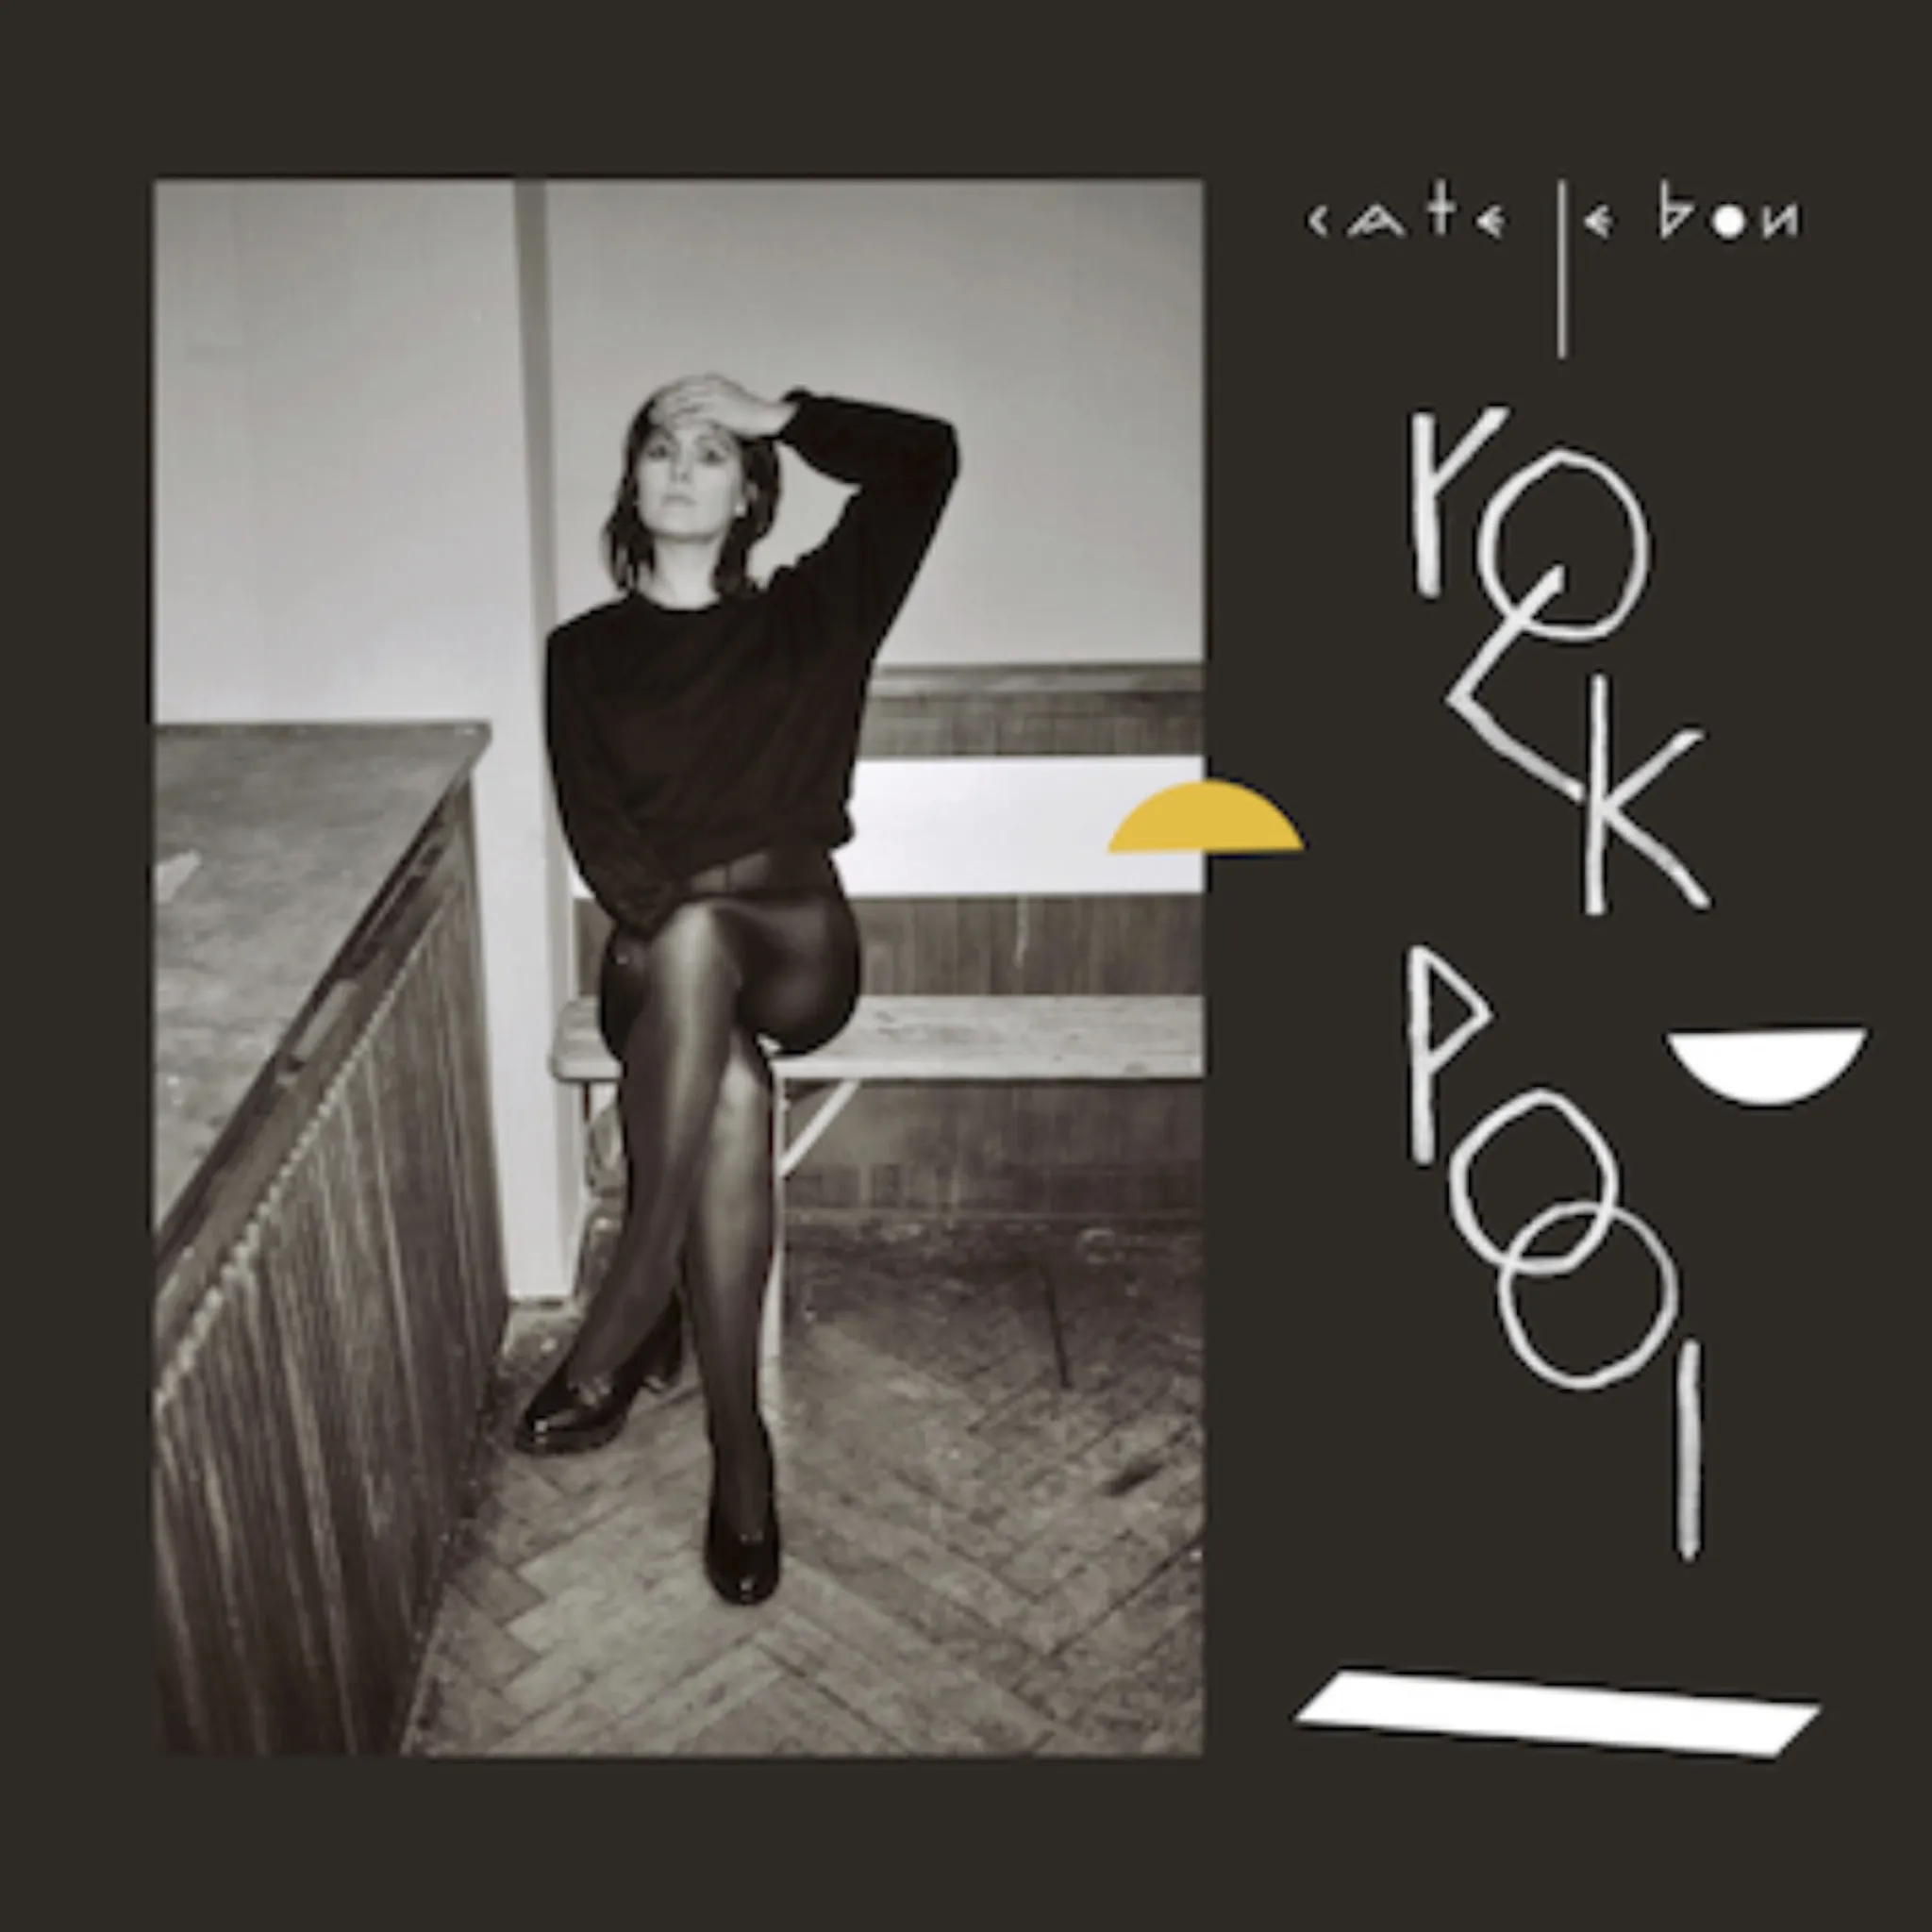 <strong>Cate Le Bon - Rock Pool</strong> (Vinyl 12 - yellow)